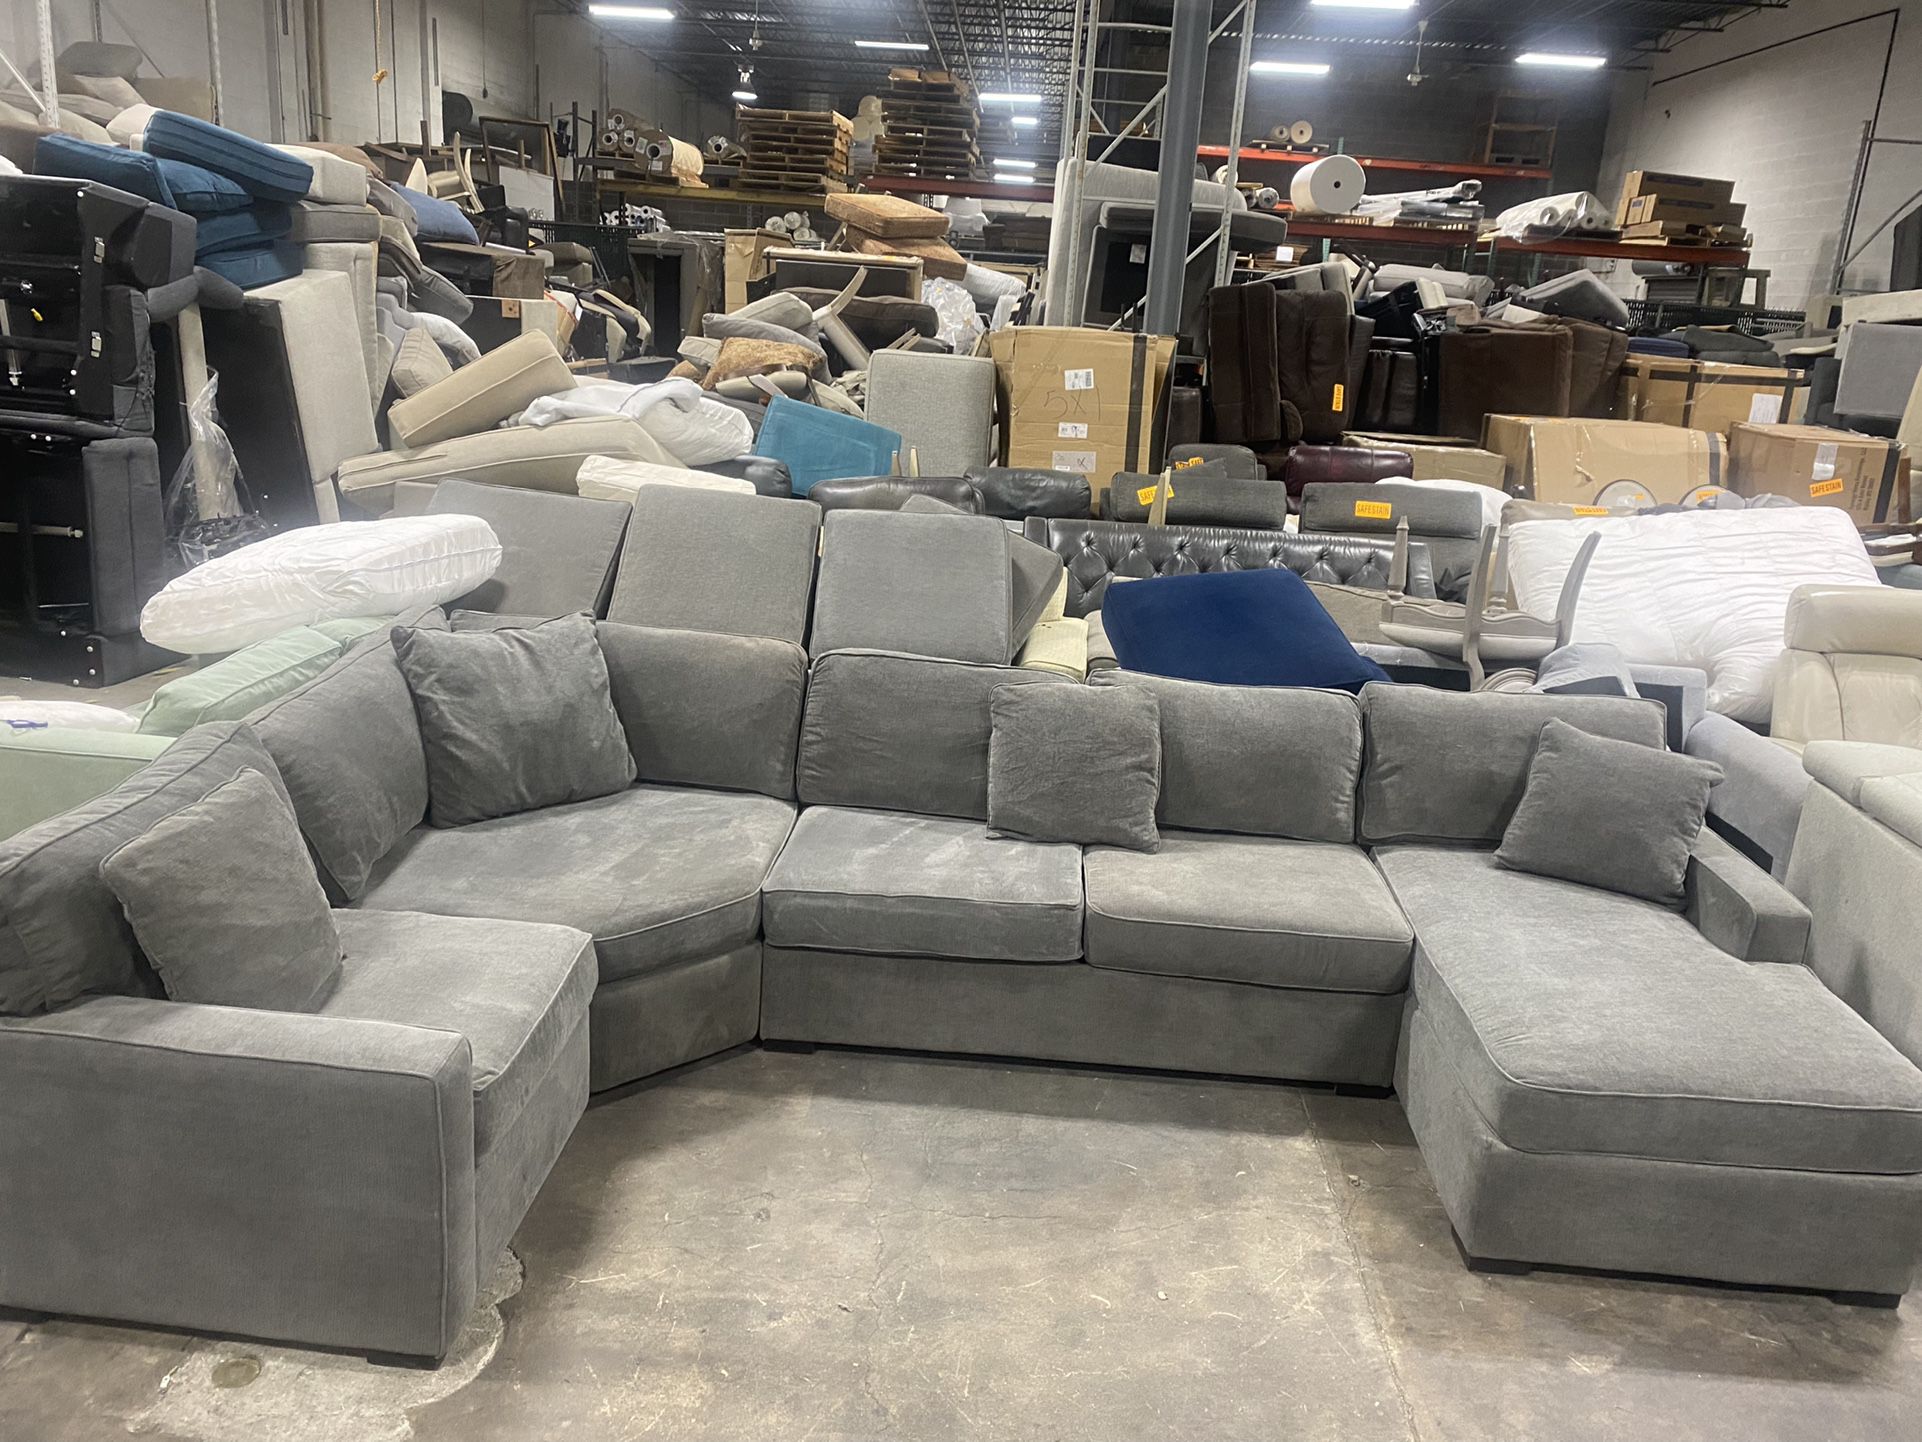 Macys Brand Radley Sectional $850 for Sale in Paterson, NJ - OfferUp